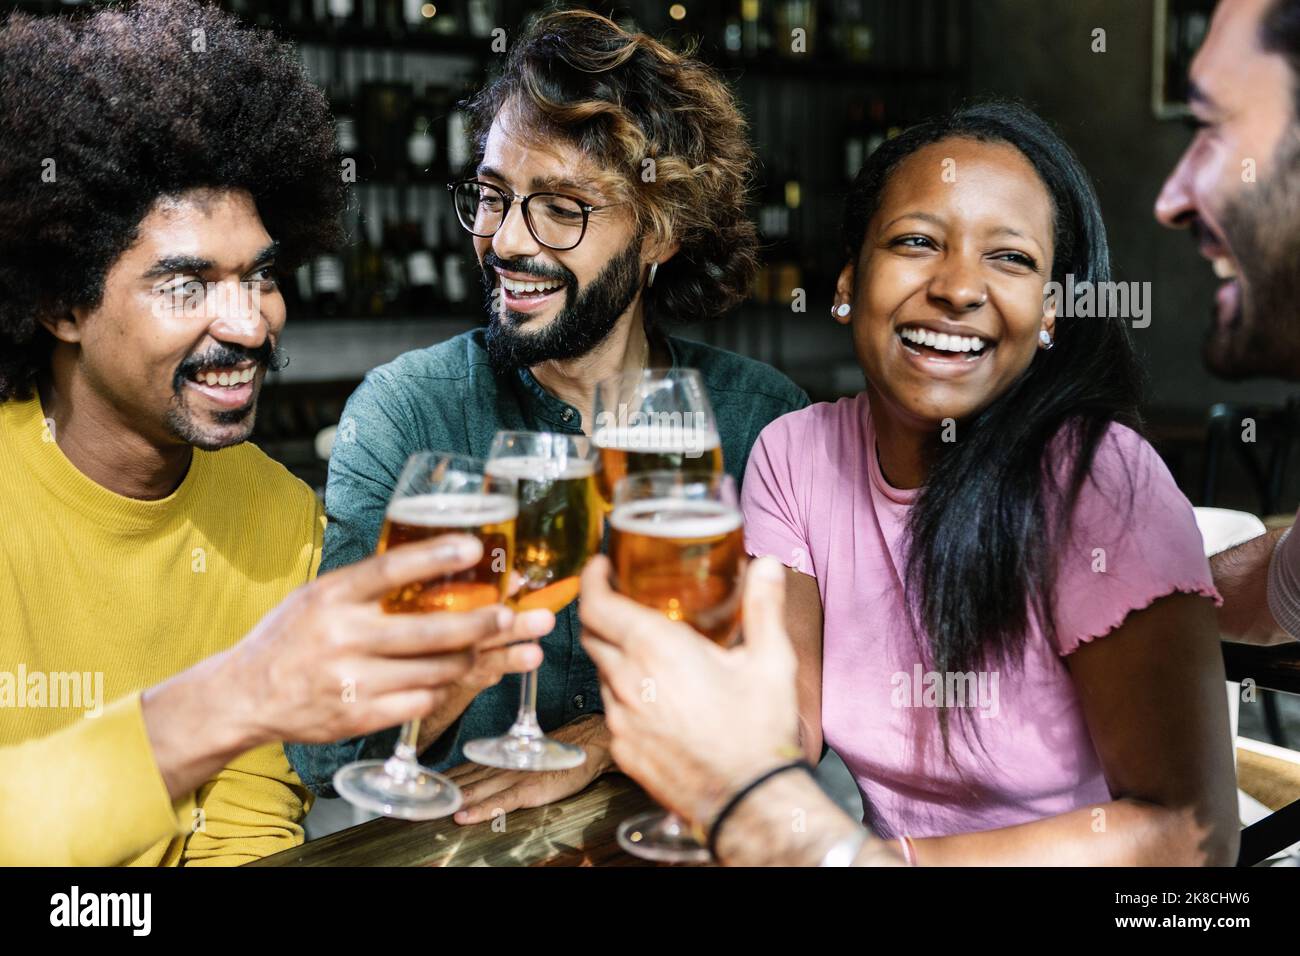 Happy multiracial young friends having fun together drinking beer at brewery bar Stock Photo